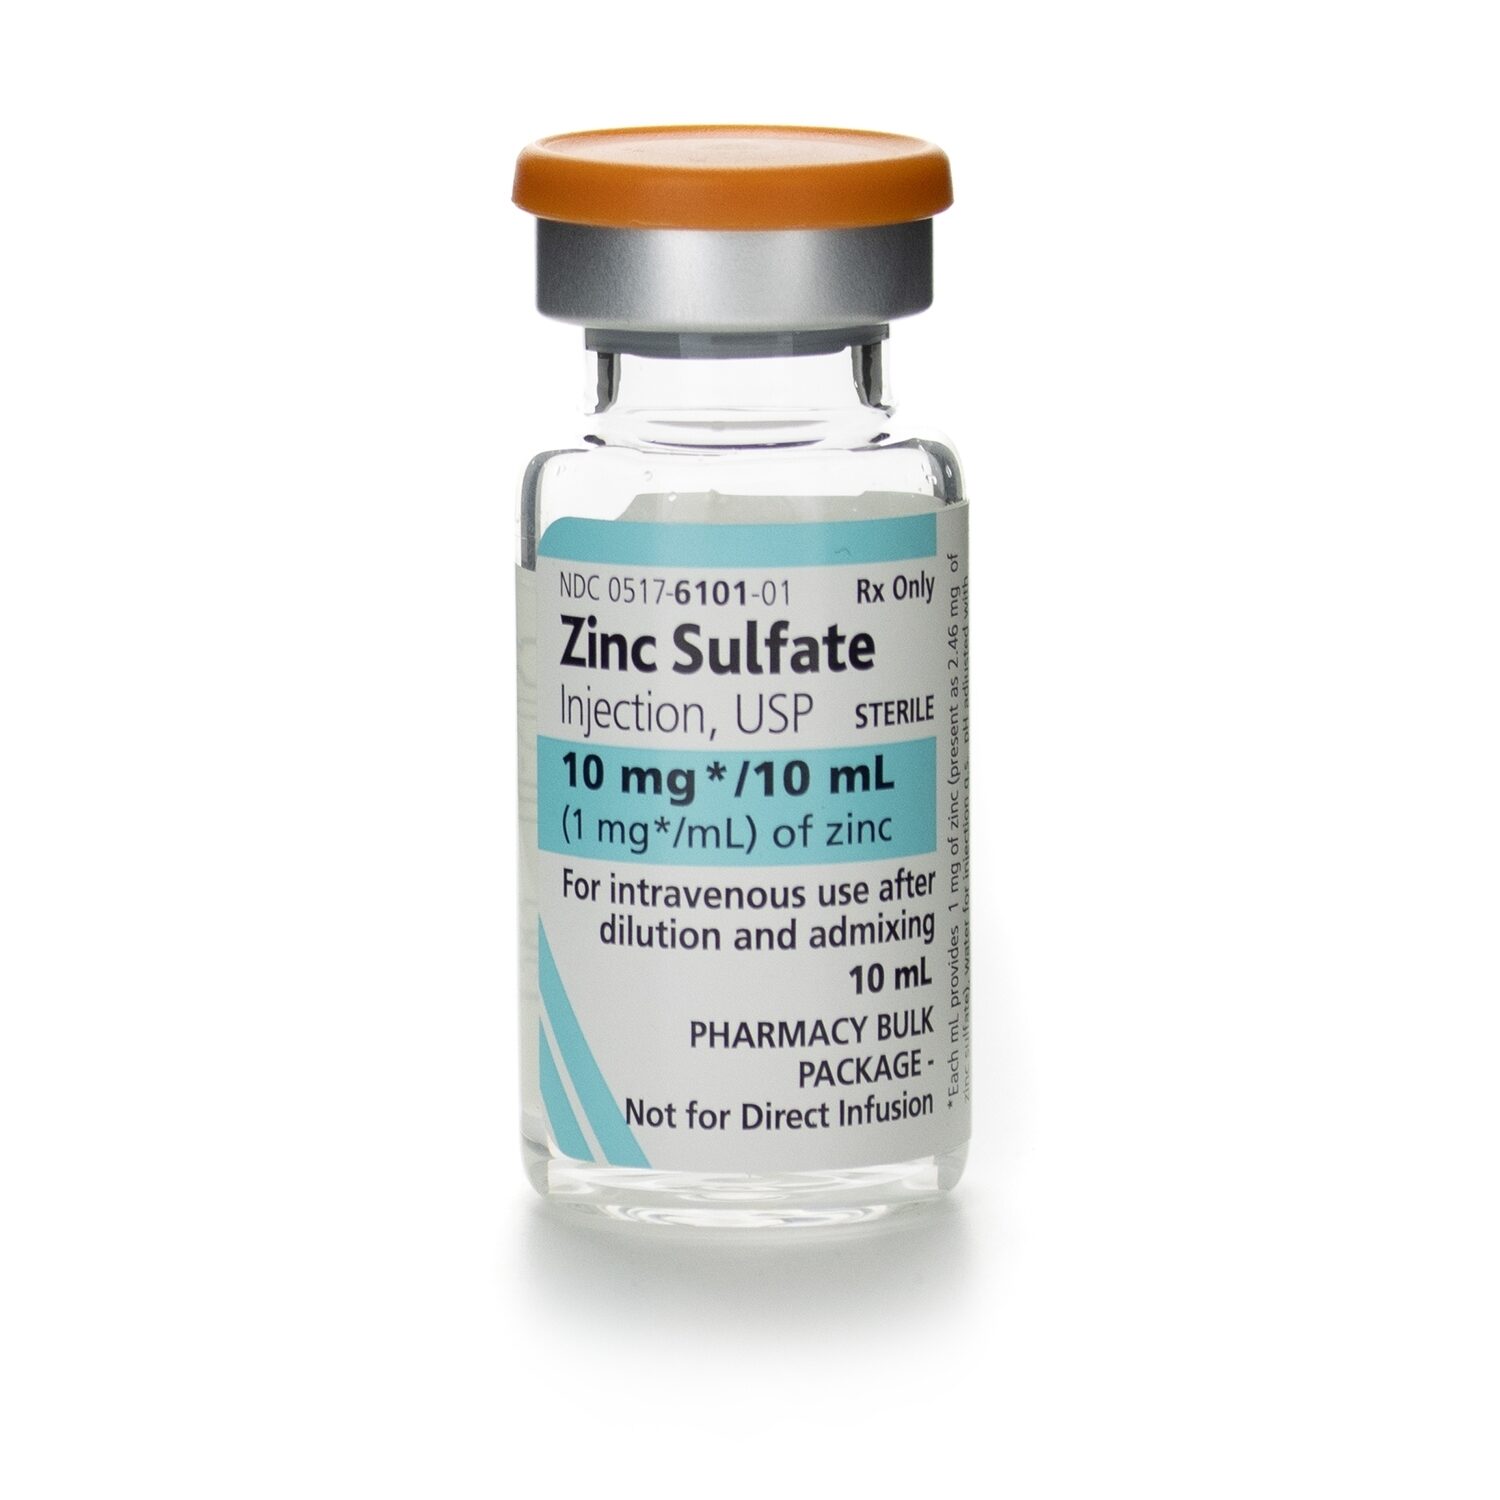 Zinc Sulfate, Preservative Free 1 mg / ml Intravenous Injection Single Dose Vial 10 ml (10mg/10ml) # 0051761010125